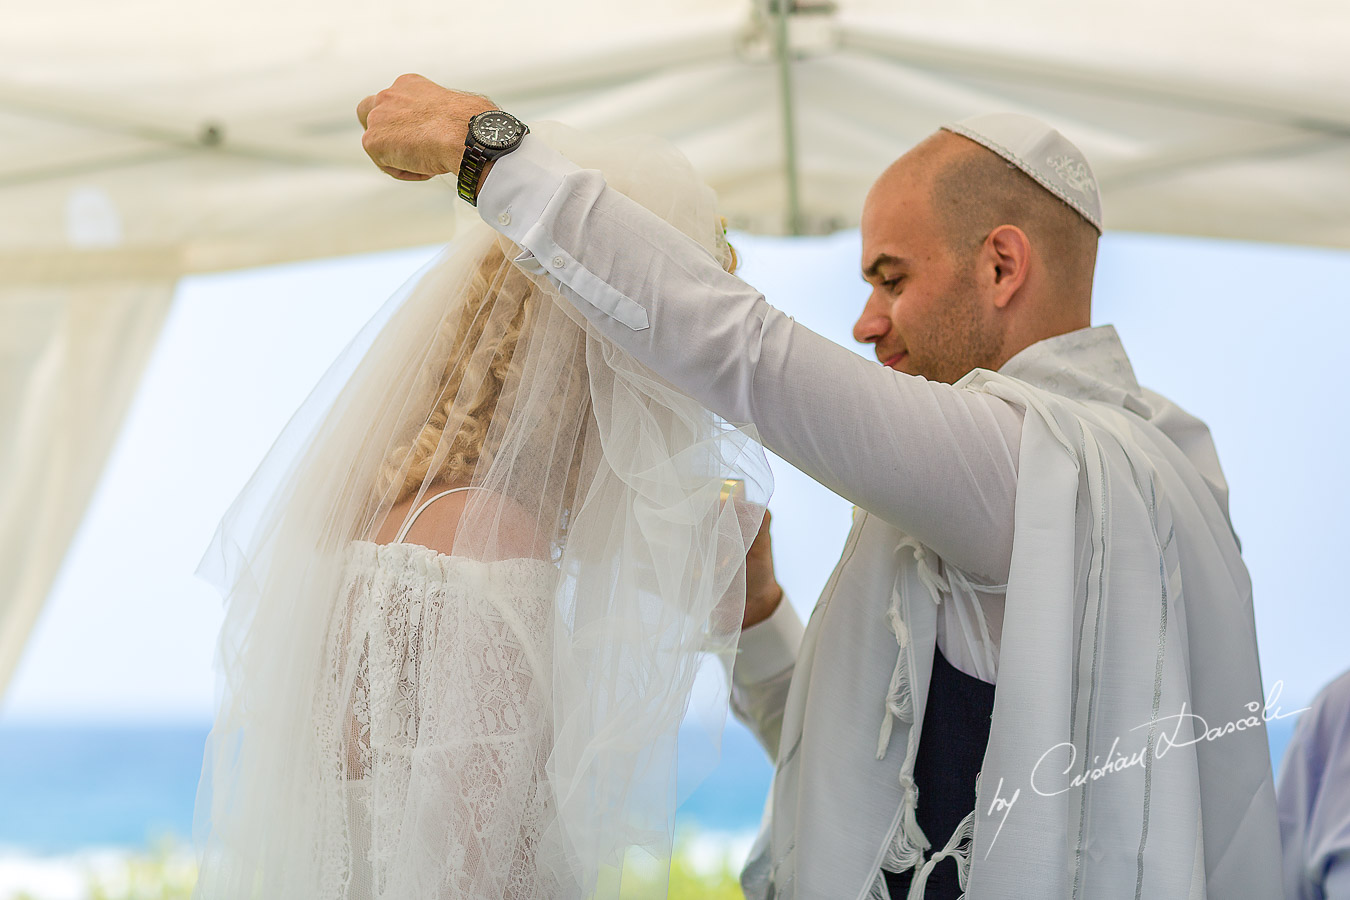 Moments captured at a Jewish Wedding Ceremony in Cyprus.